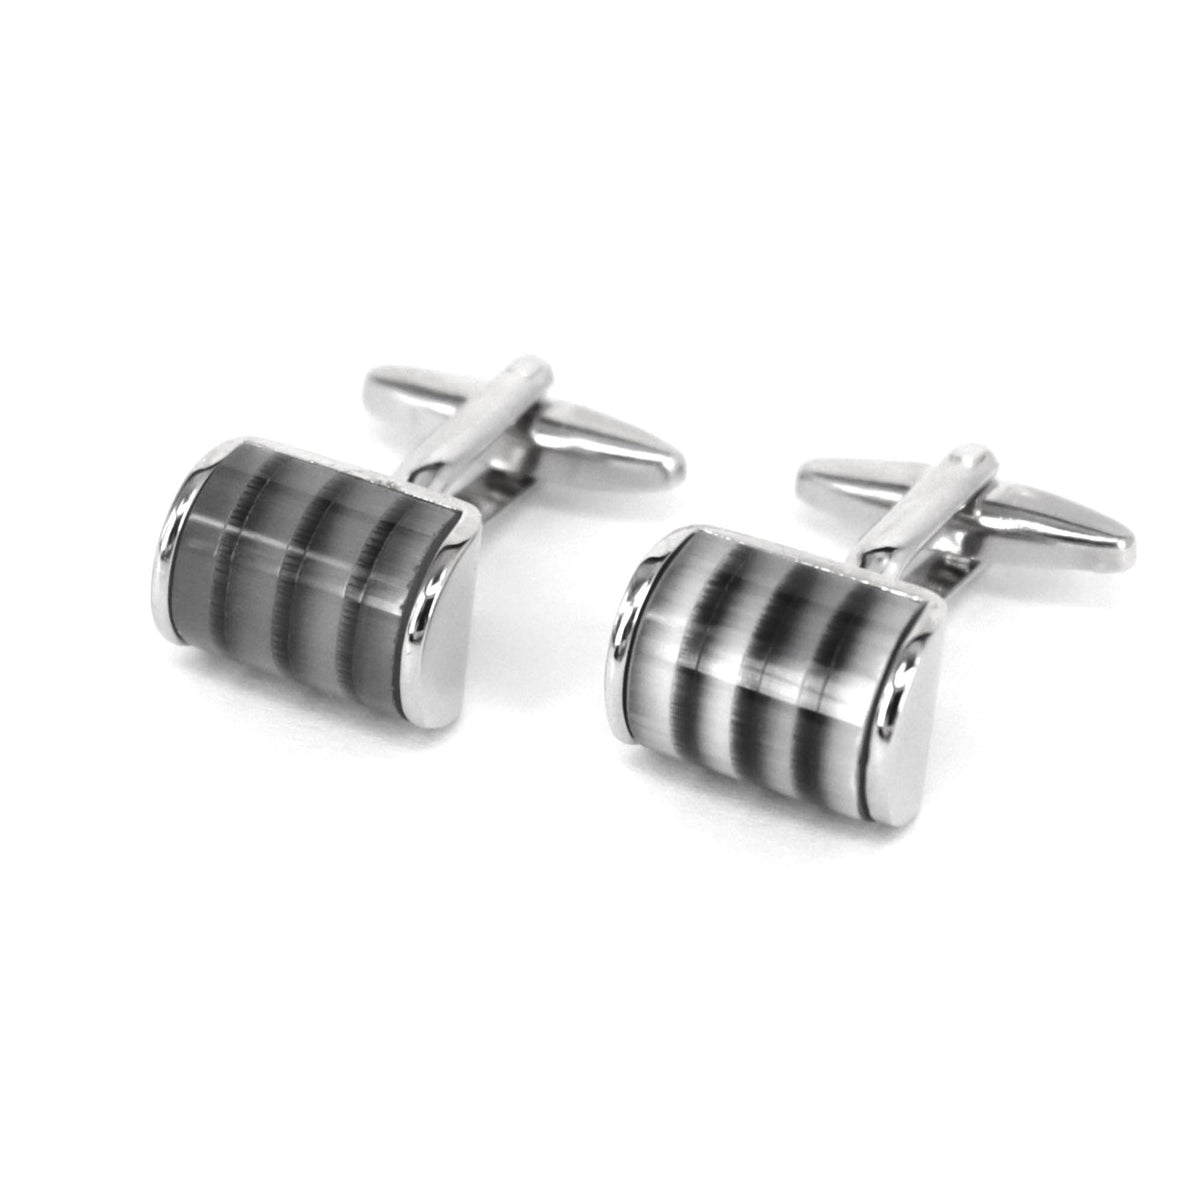 D-shape fiber glass Cufflink in black and white (Online Exclusive)